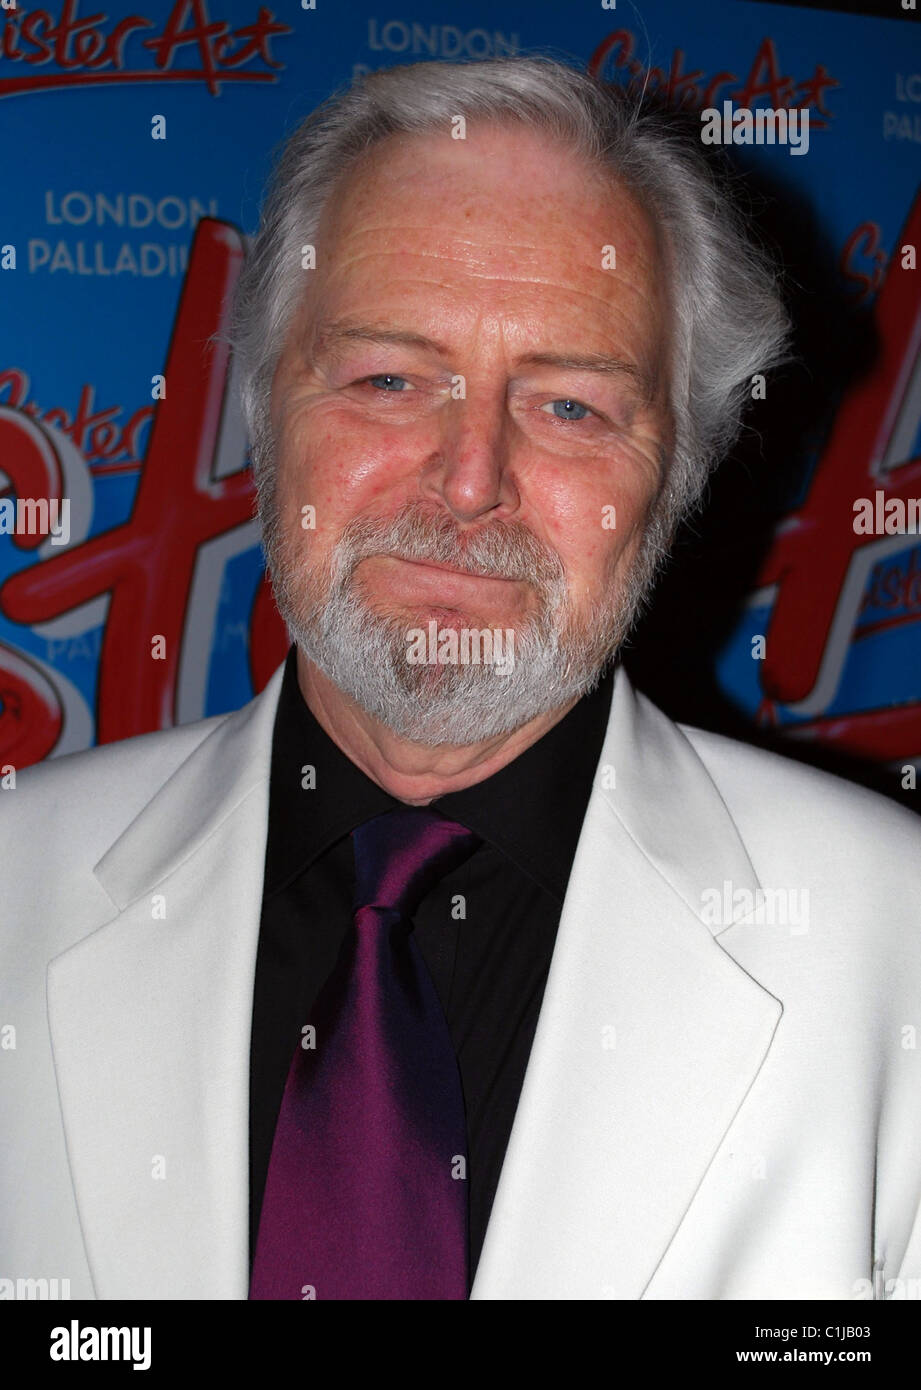 Ian Lavender attend the press night of 'Sister Act: The Musical' held at the London Palladium London, England - 02.06.09 Sean Stock Photo